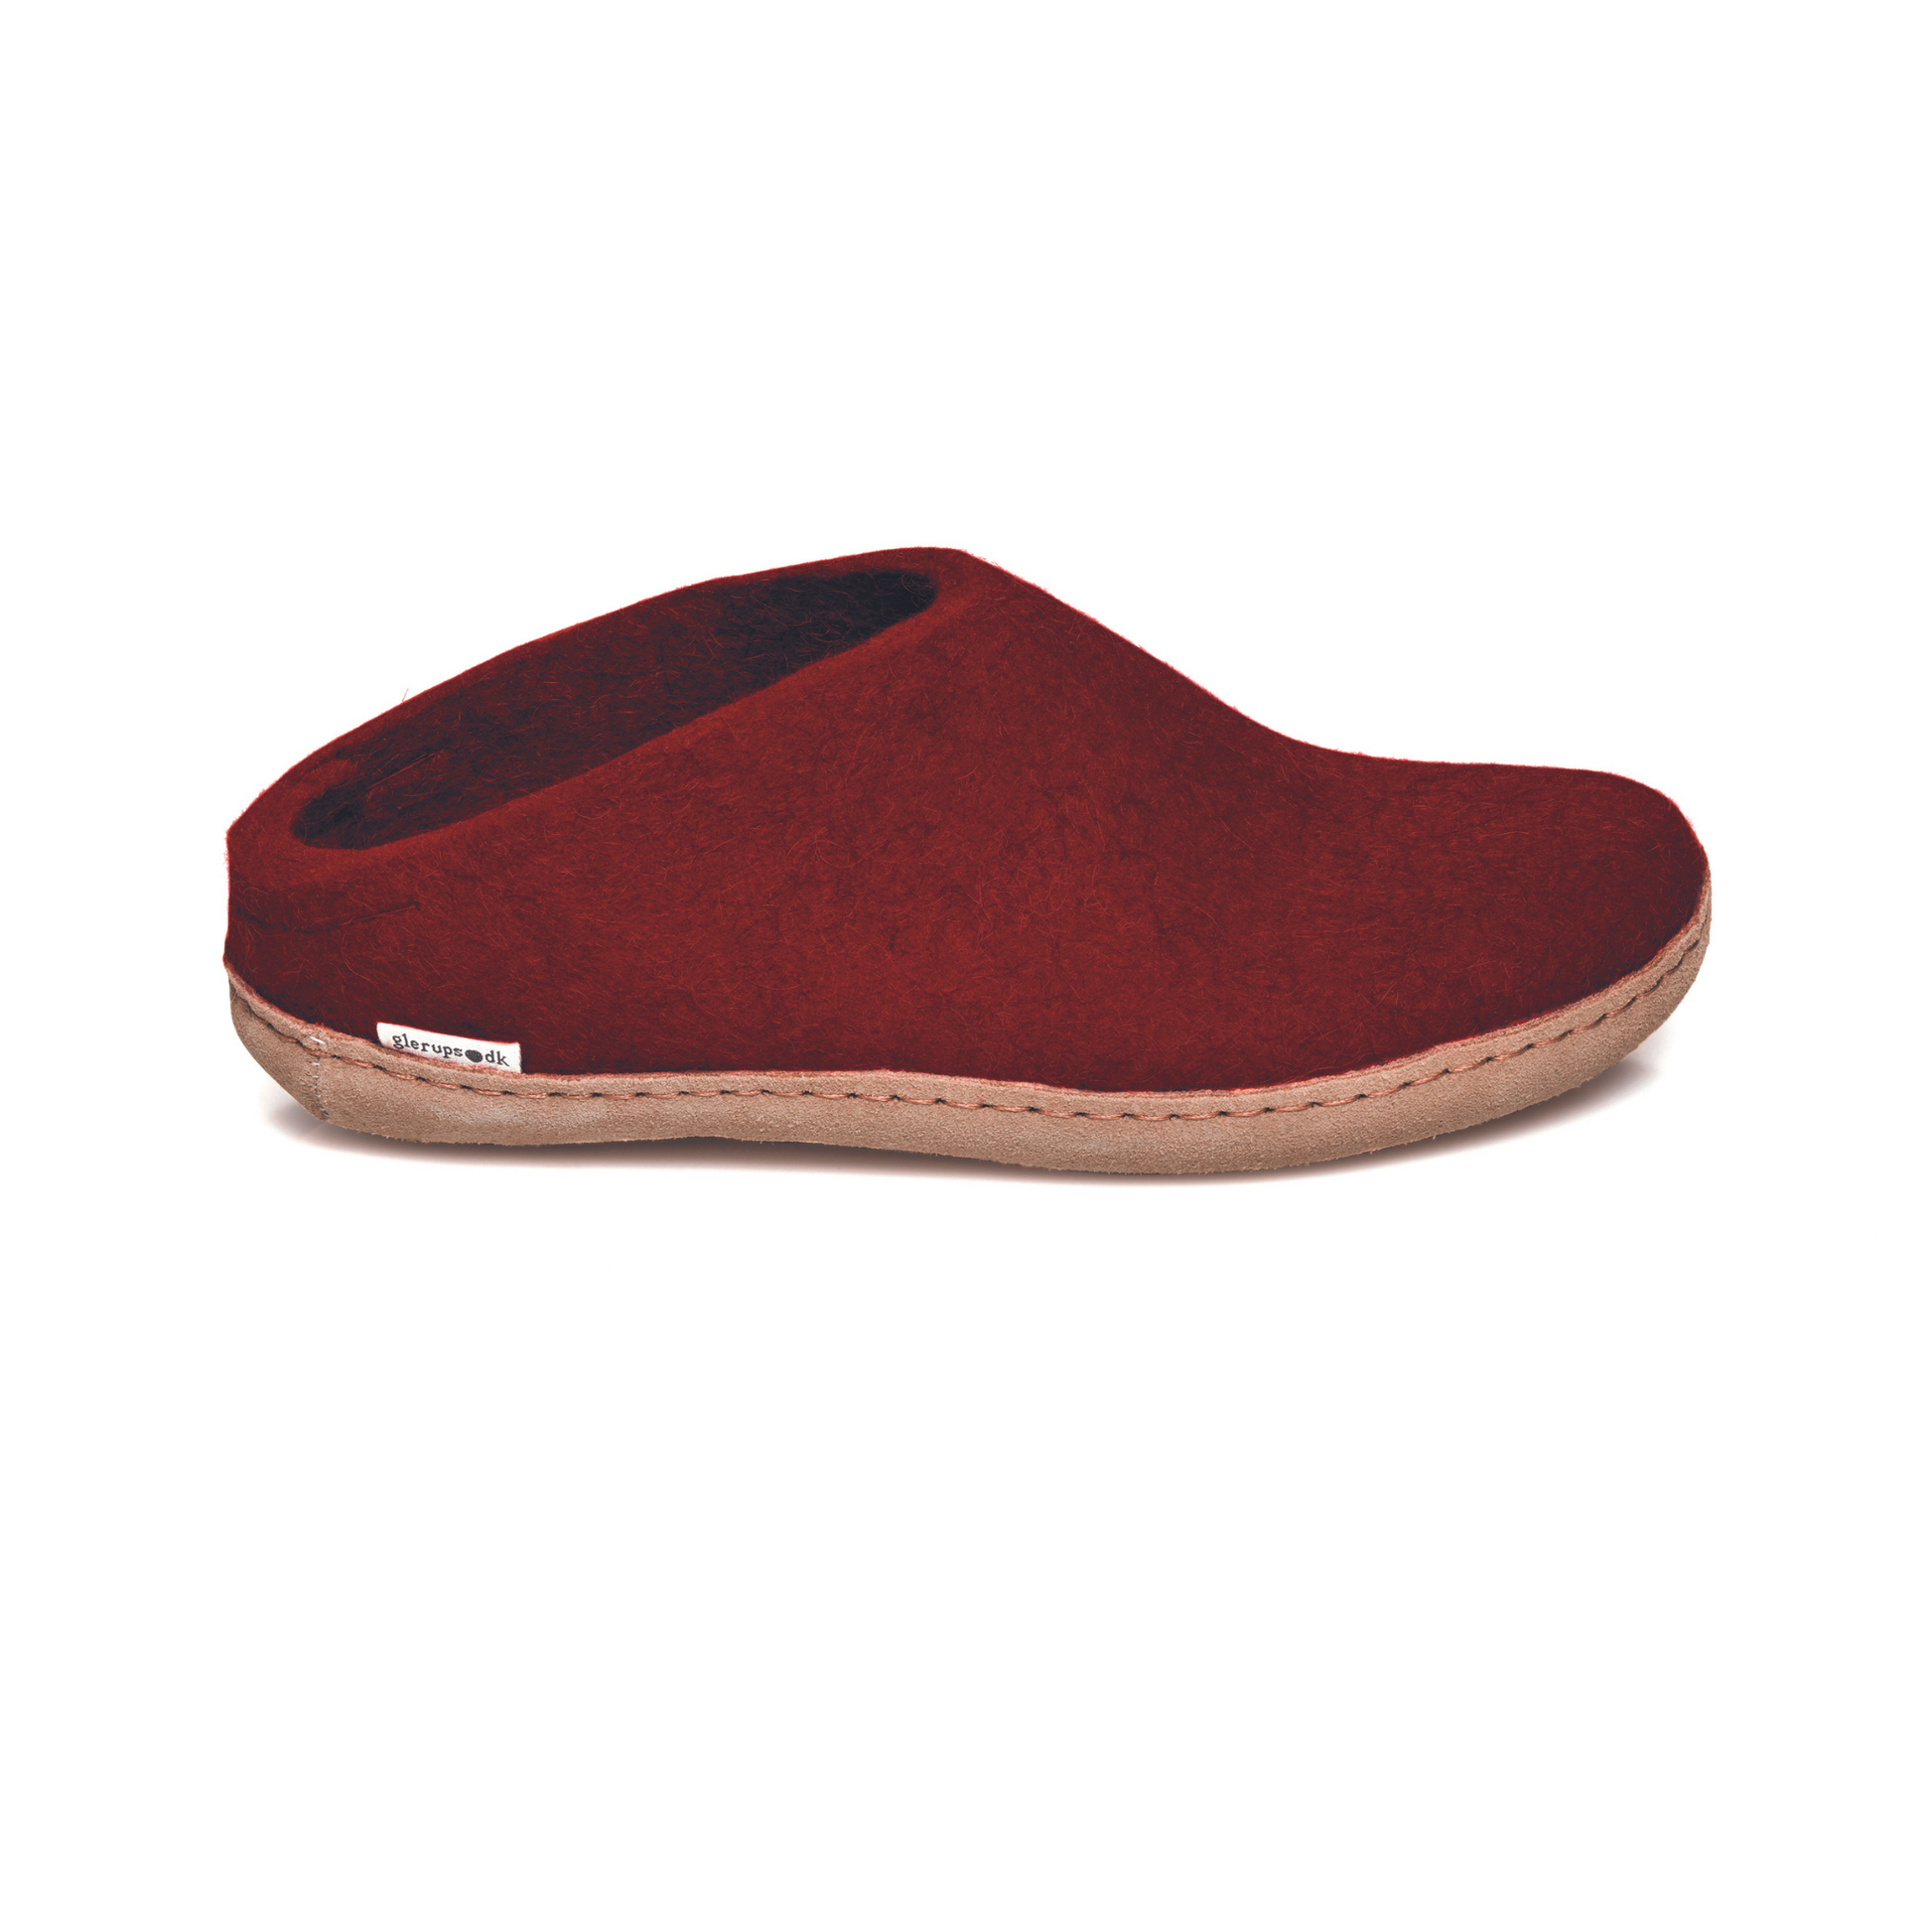 A deep crimson slipper is pictured in profile, showing the low back of the heel. The bottom lined in tan leather has a small tag with the brand name attached in the seam where the leather meets the felted wool.